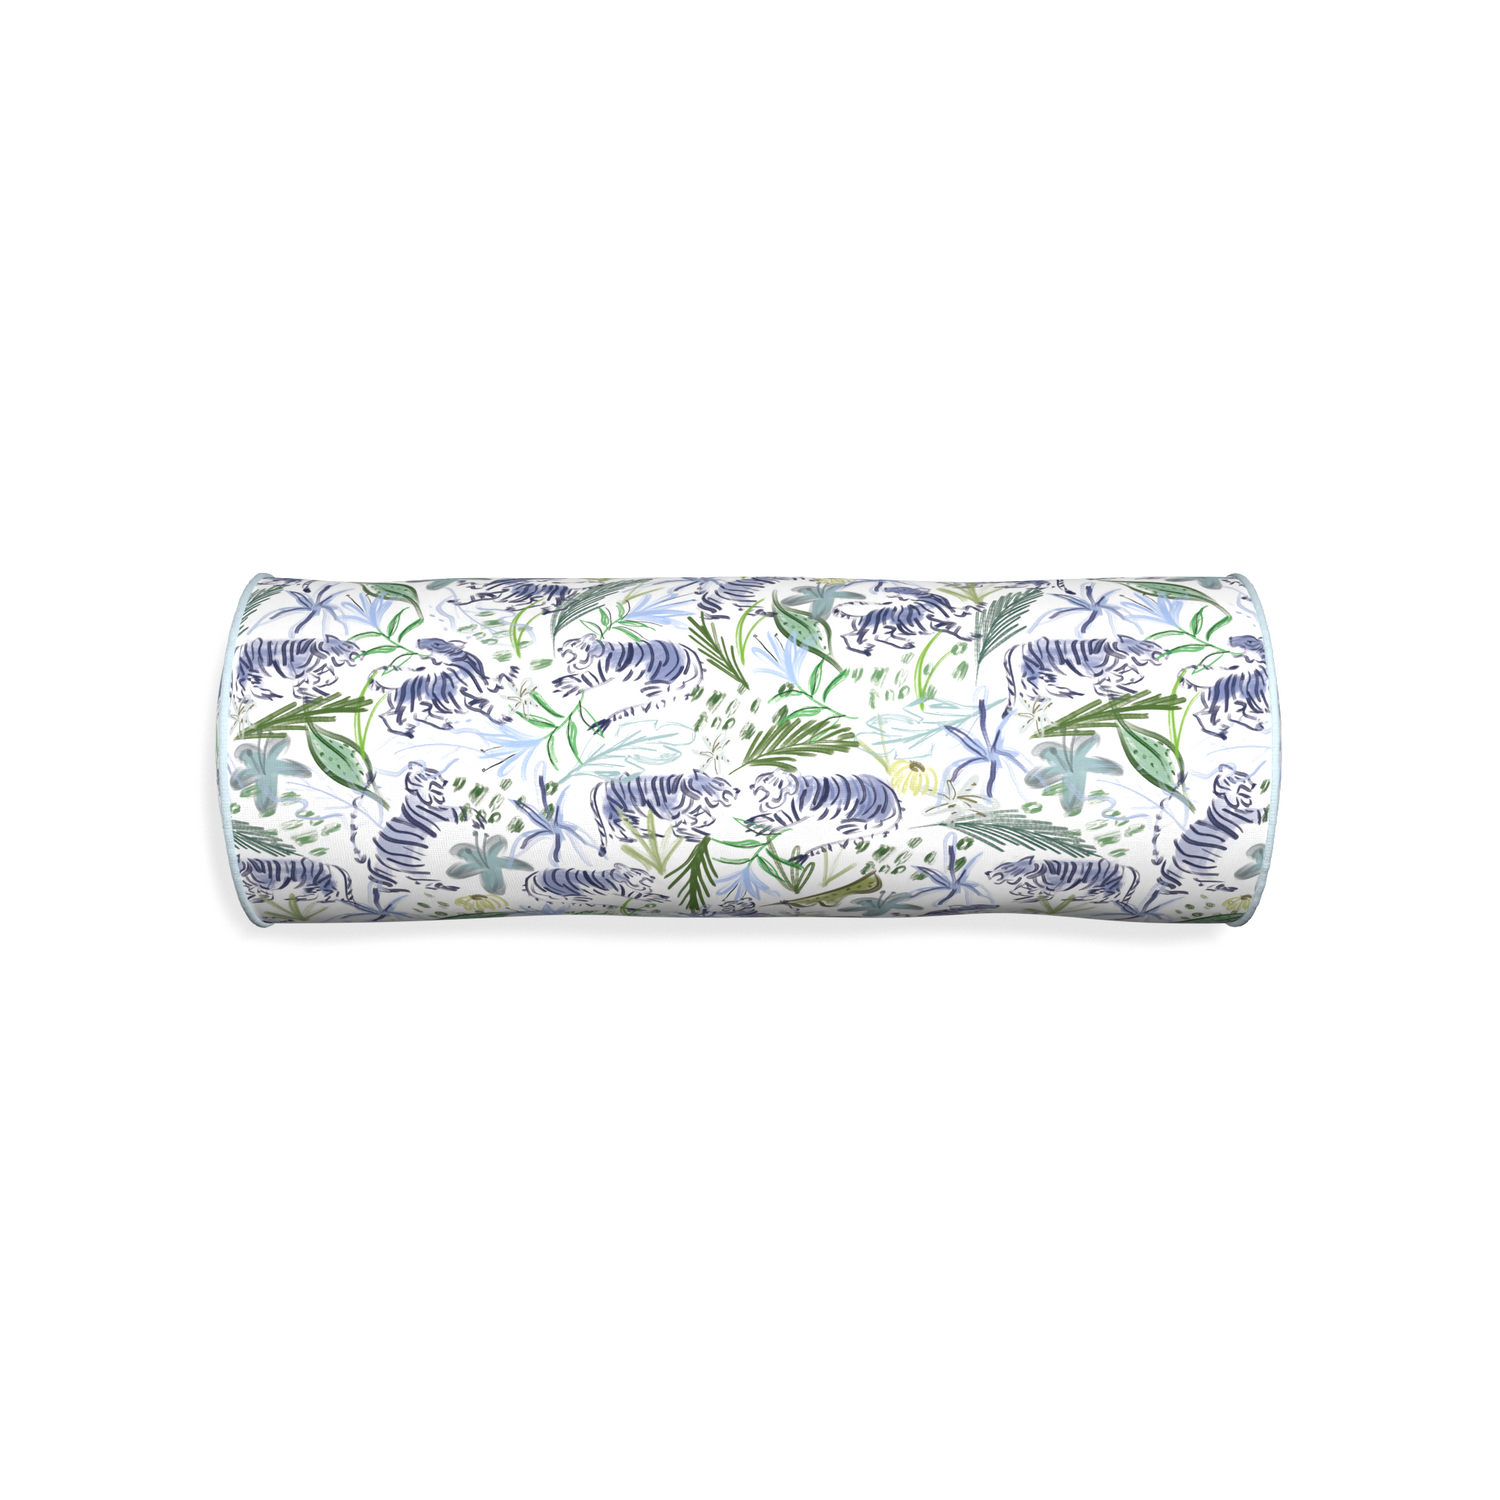 Bolster frida green custom green tigerpillow with powder piping on white background